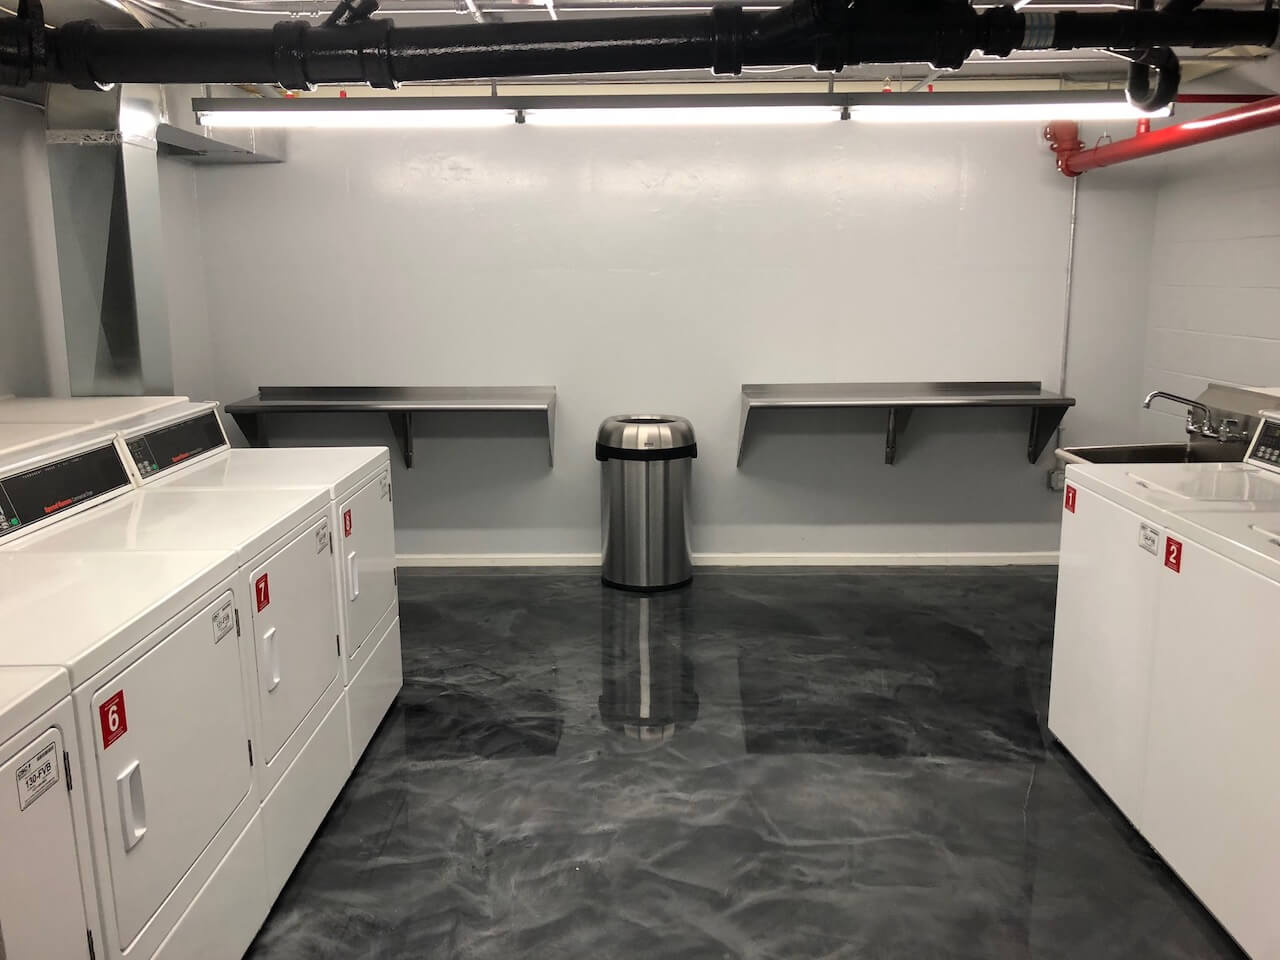 A dark gray and black epoxy floor installed in the basement laundry room of a multi-family property.